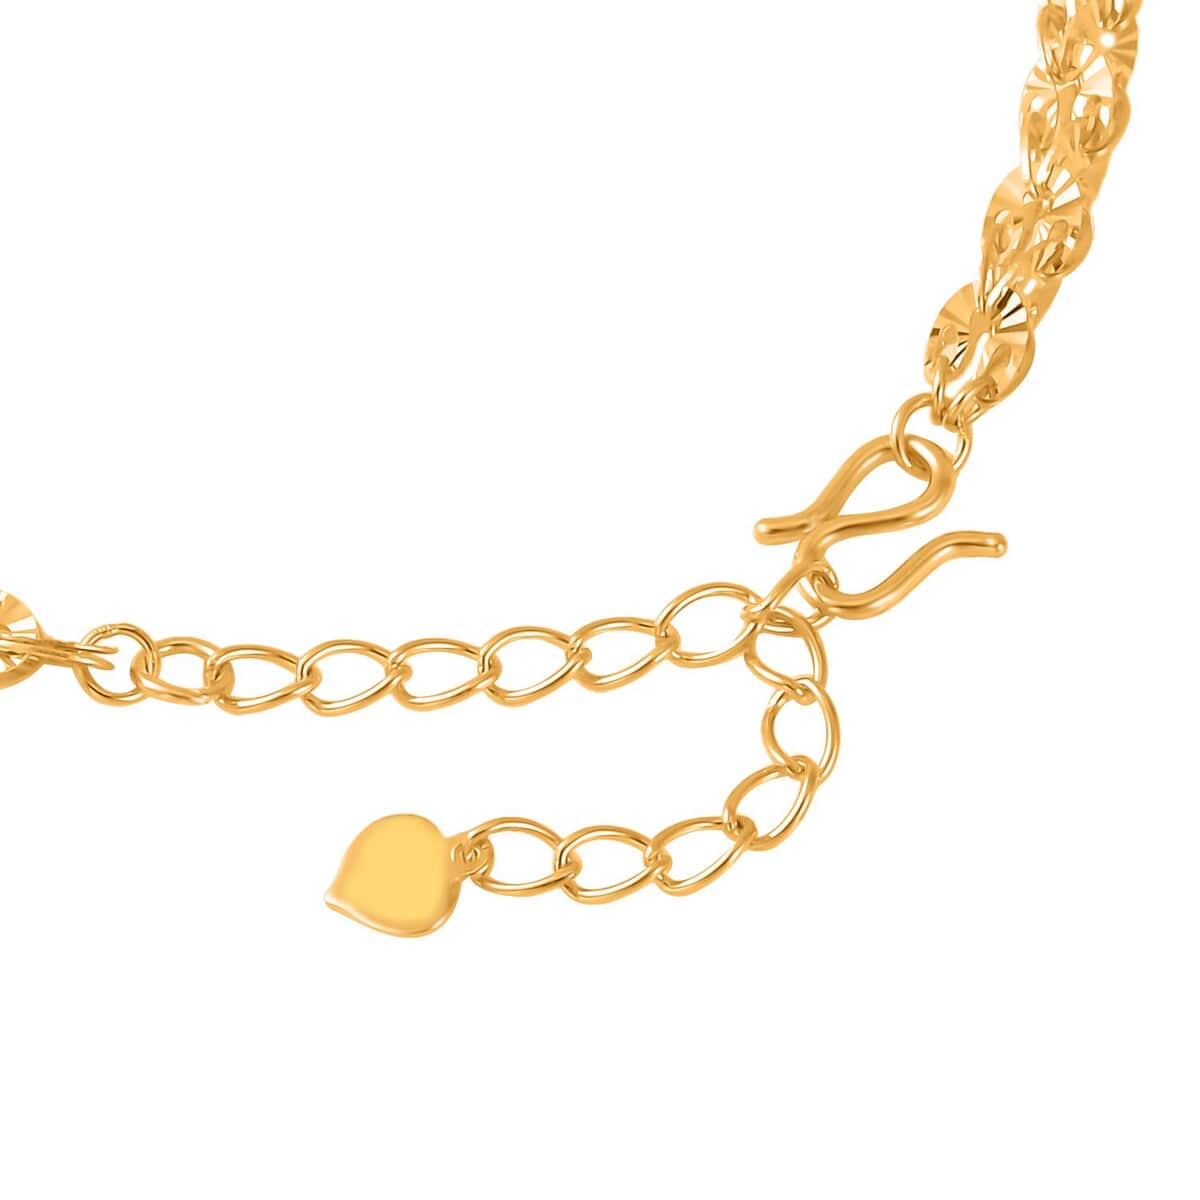 24K Yellow Gold Electroform 5mm Phoenix Tail Chain Bracelet (6.50-8.0In) 5.35 Grams image number 3